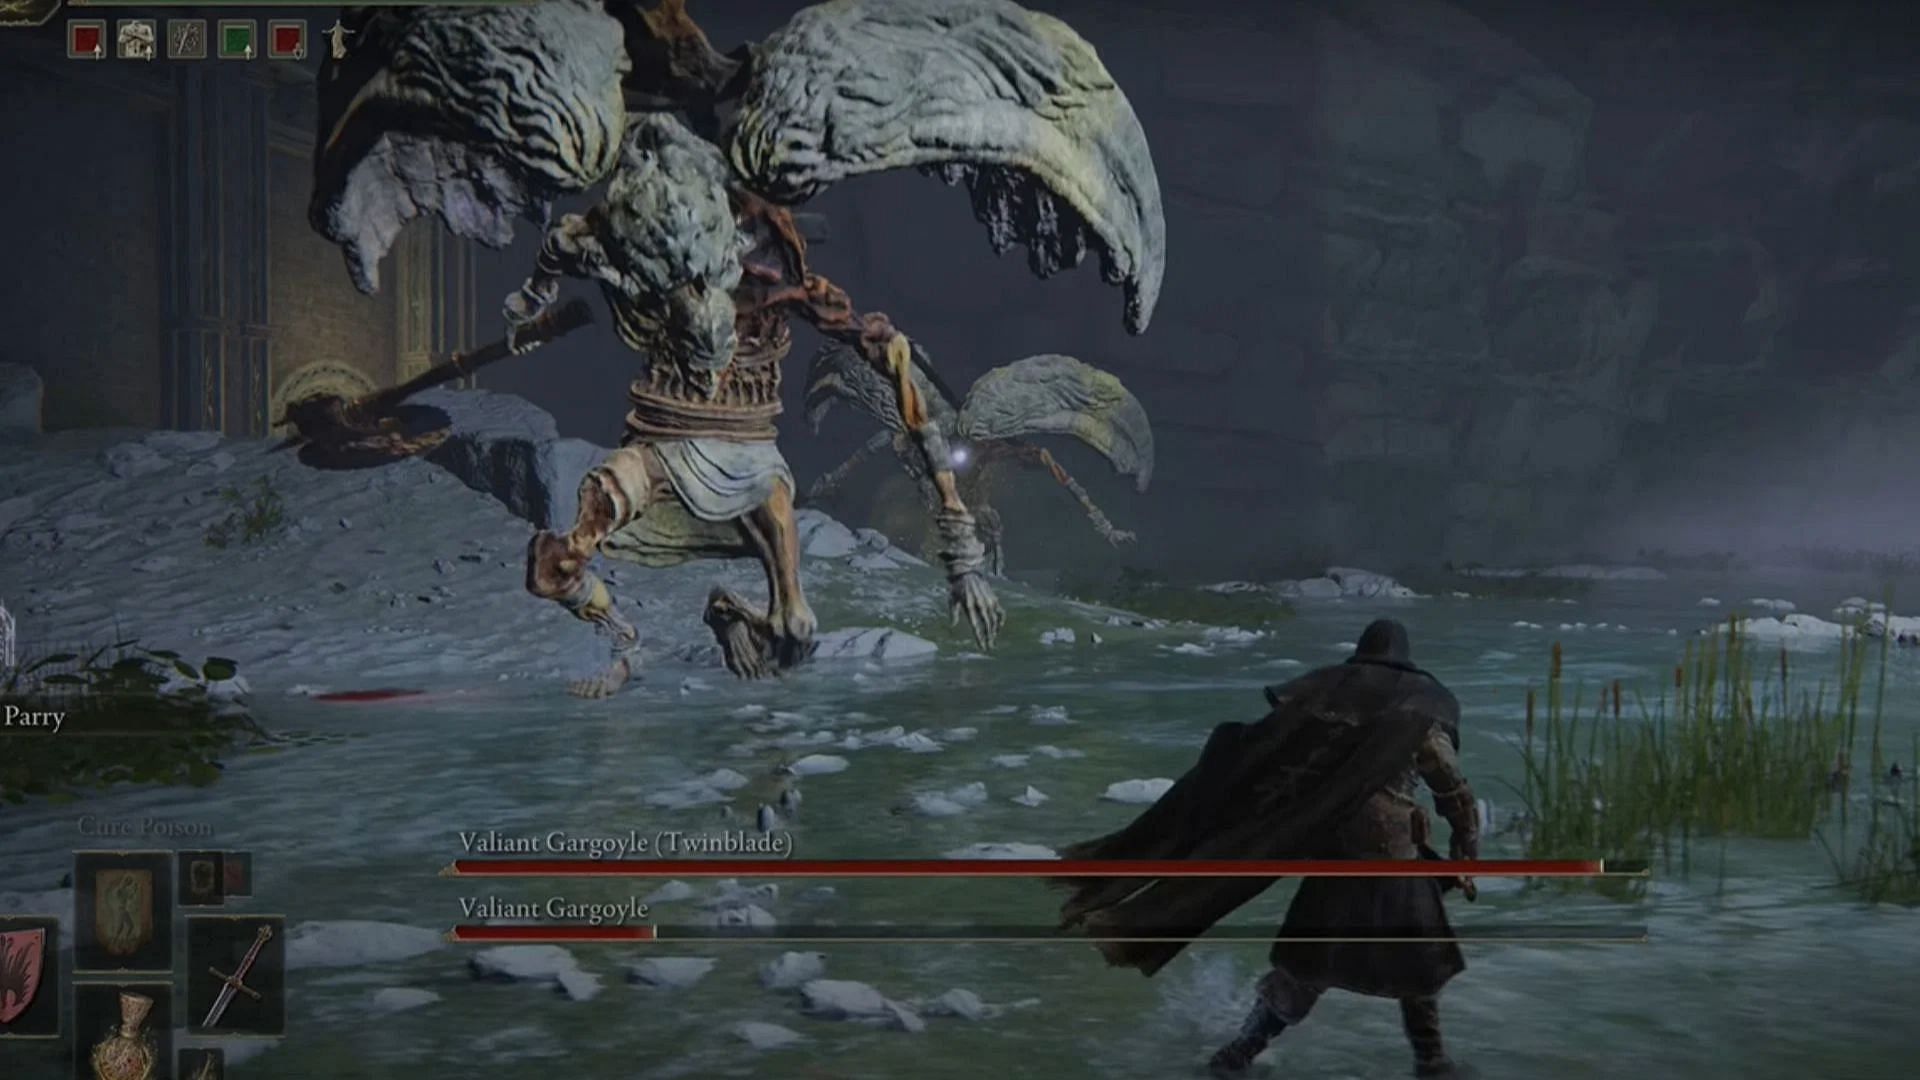 Valiant Gargoyle is one of the most challenging mid-game encounters in Elden Ring (Image via FromSoftware)